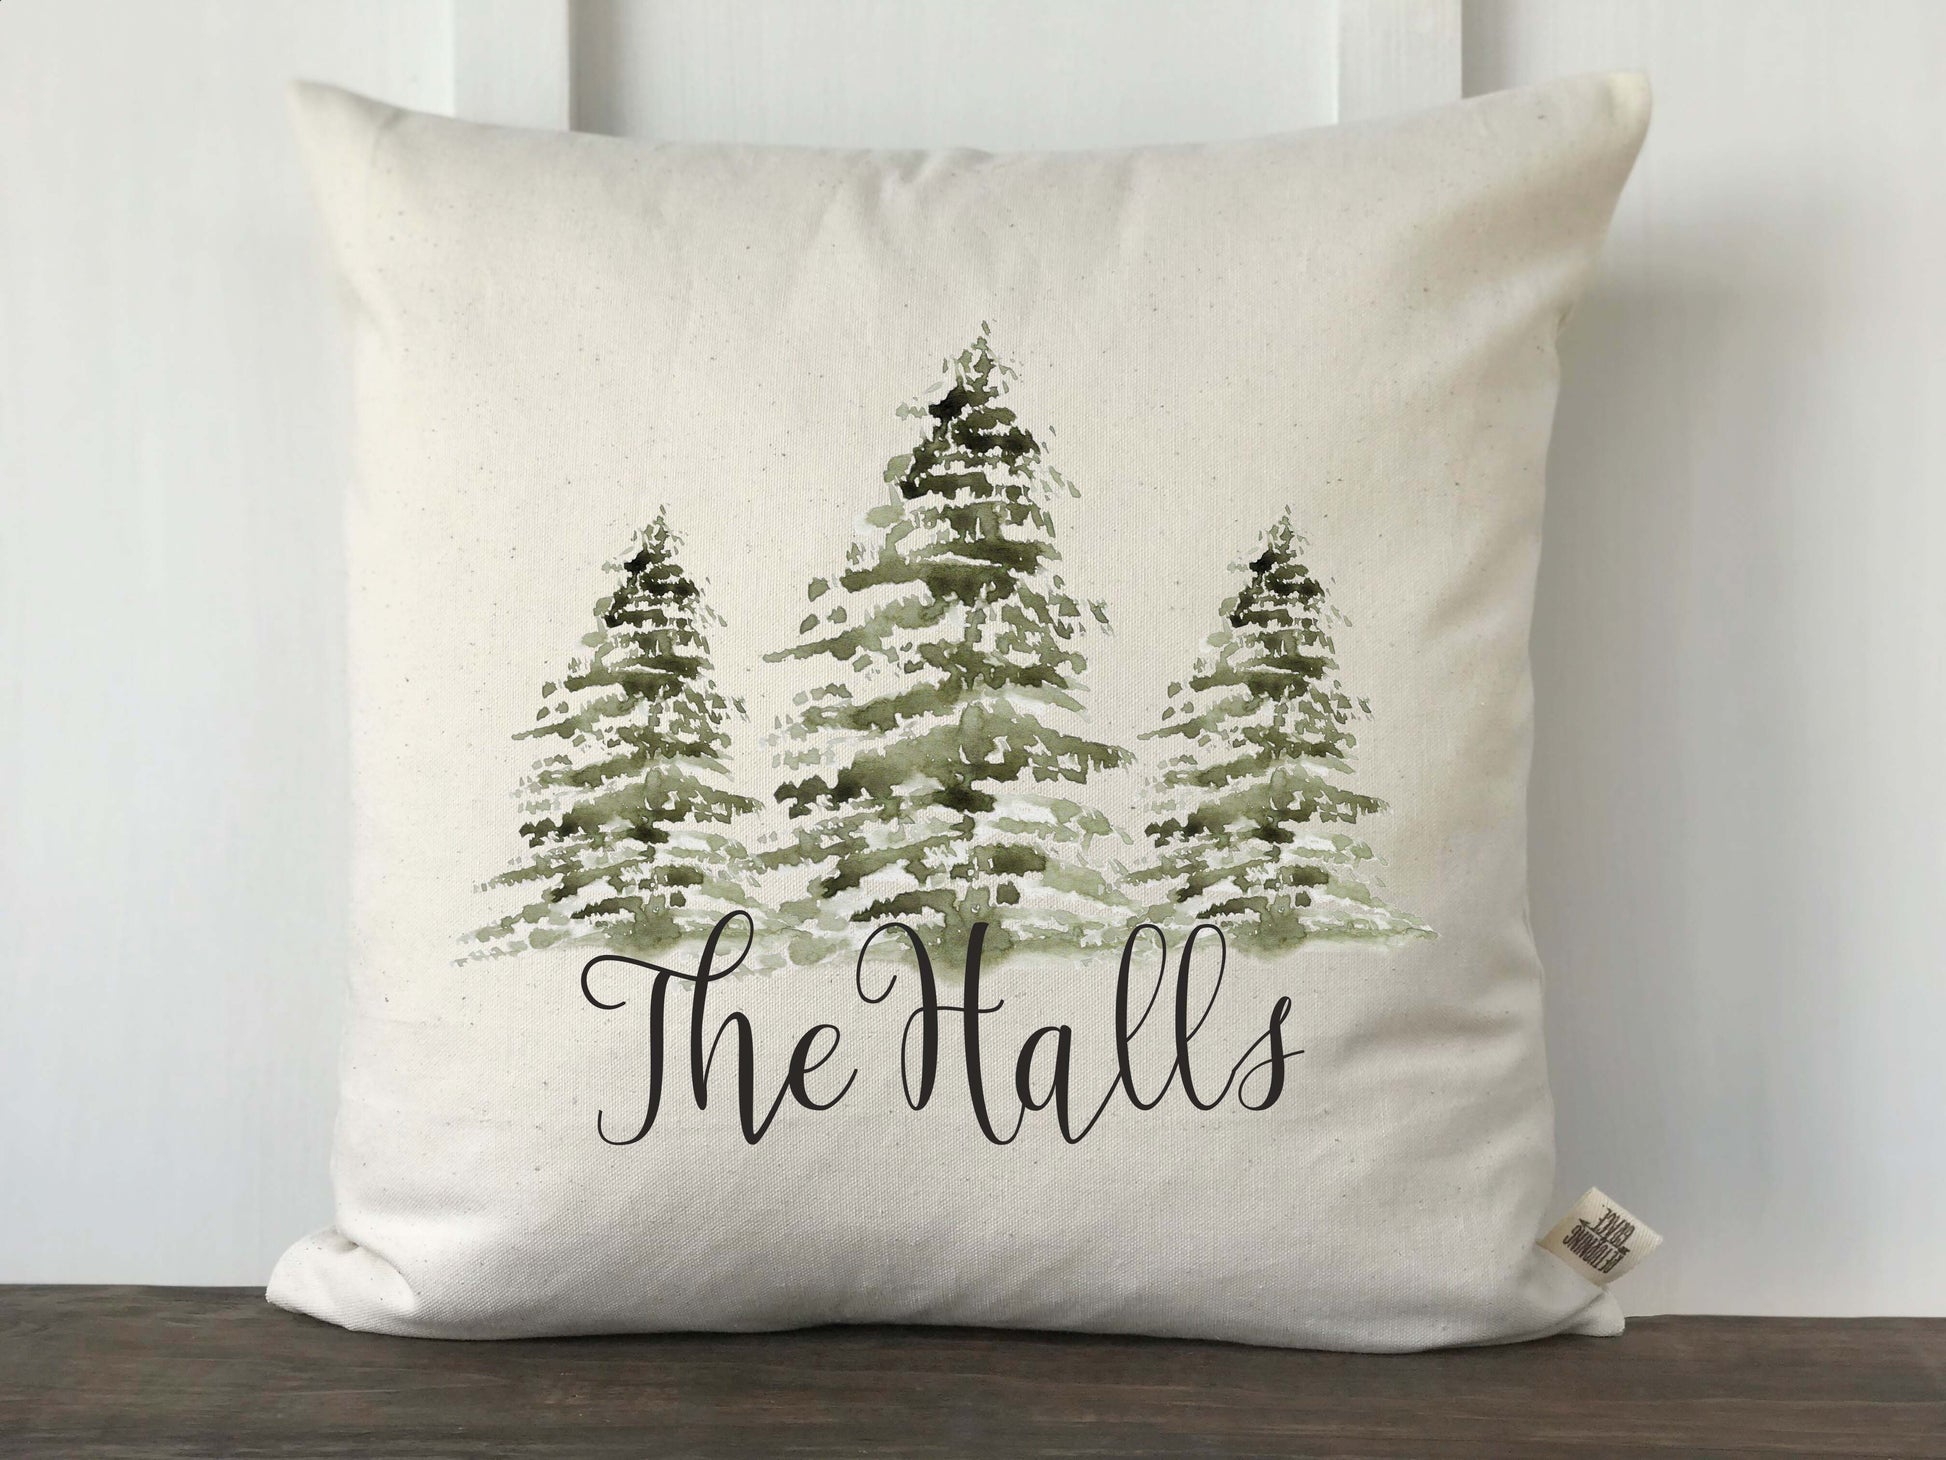 Watercolor 3 Christmas Trees Personalized Pillow Cover - Returning Grace Designs